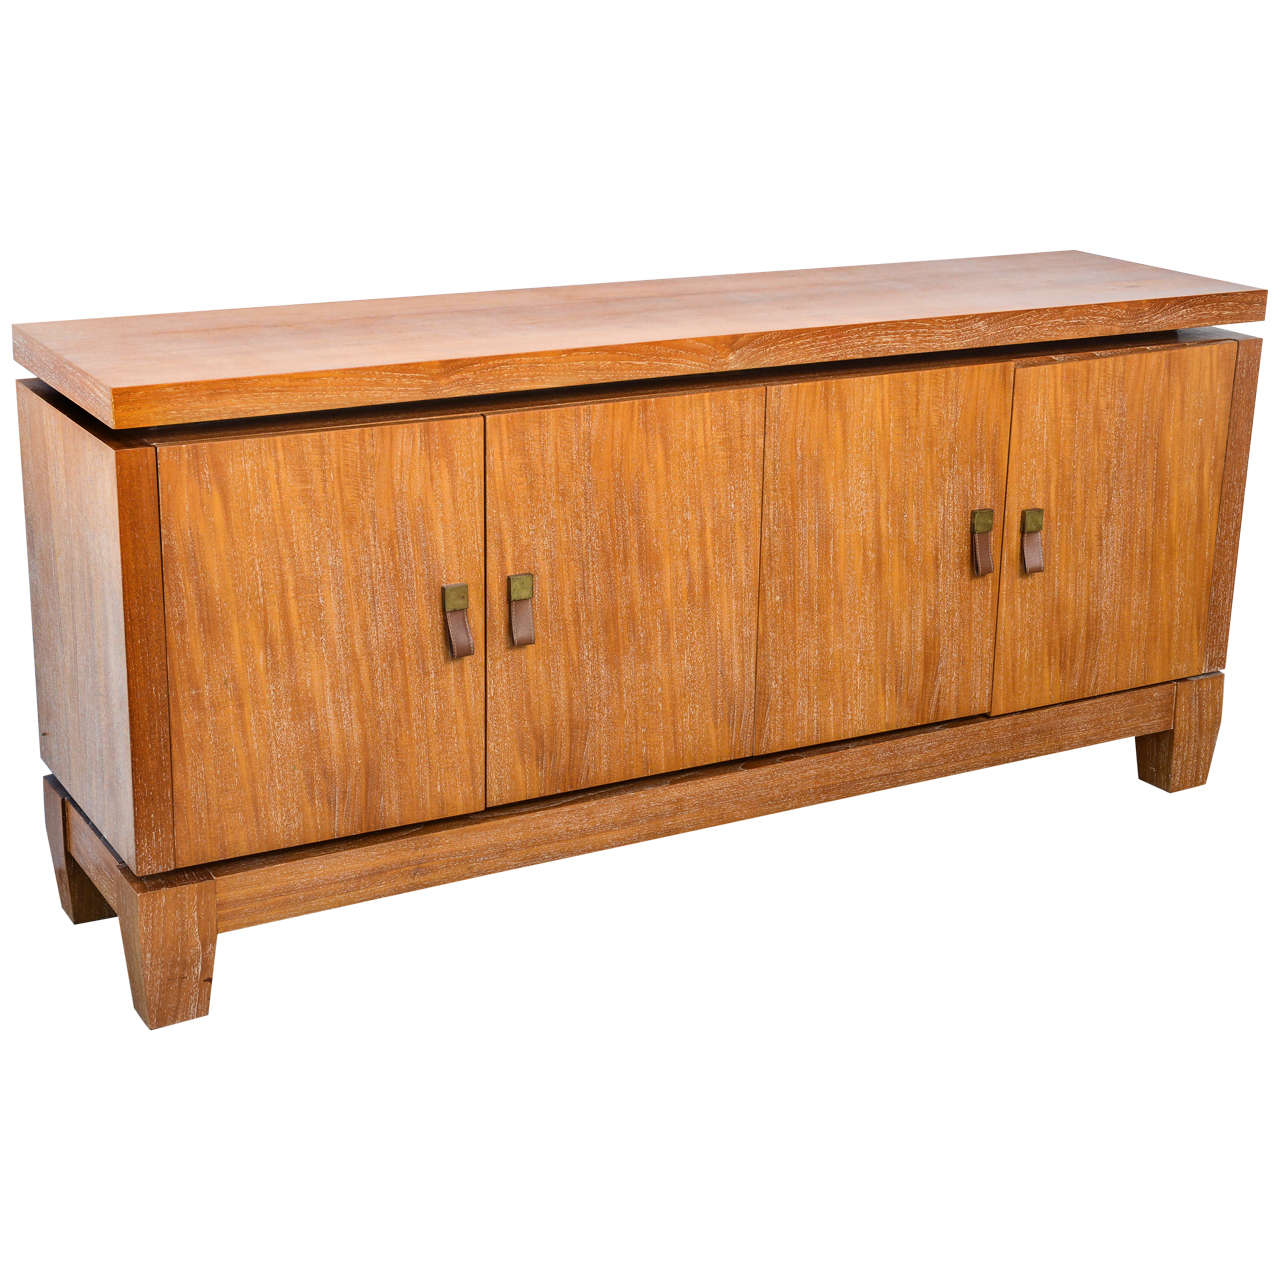 French Modern Cerused Oak and Leather Four-Door Credenza, Style of Jacques Adnet